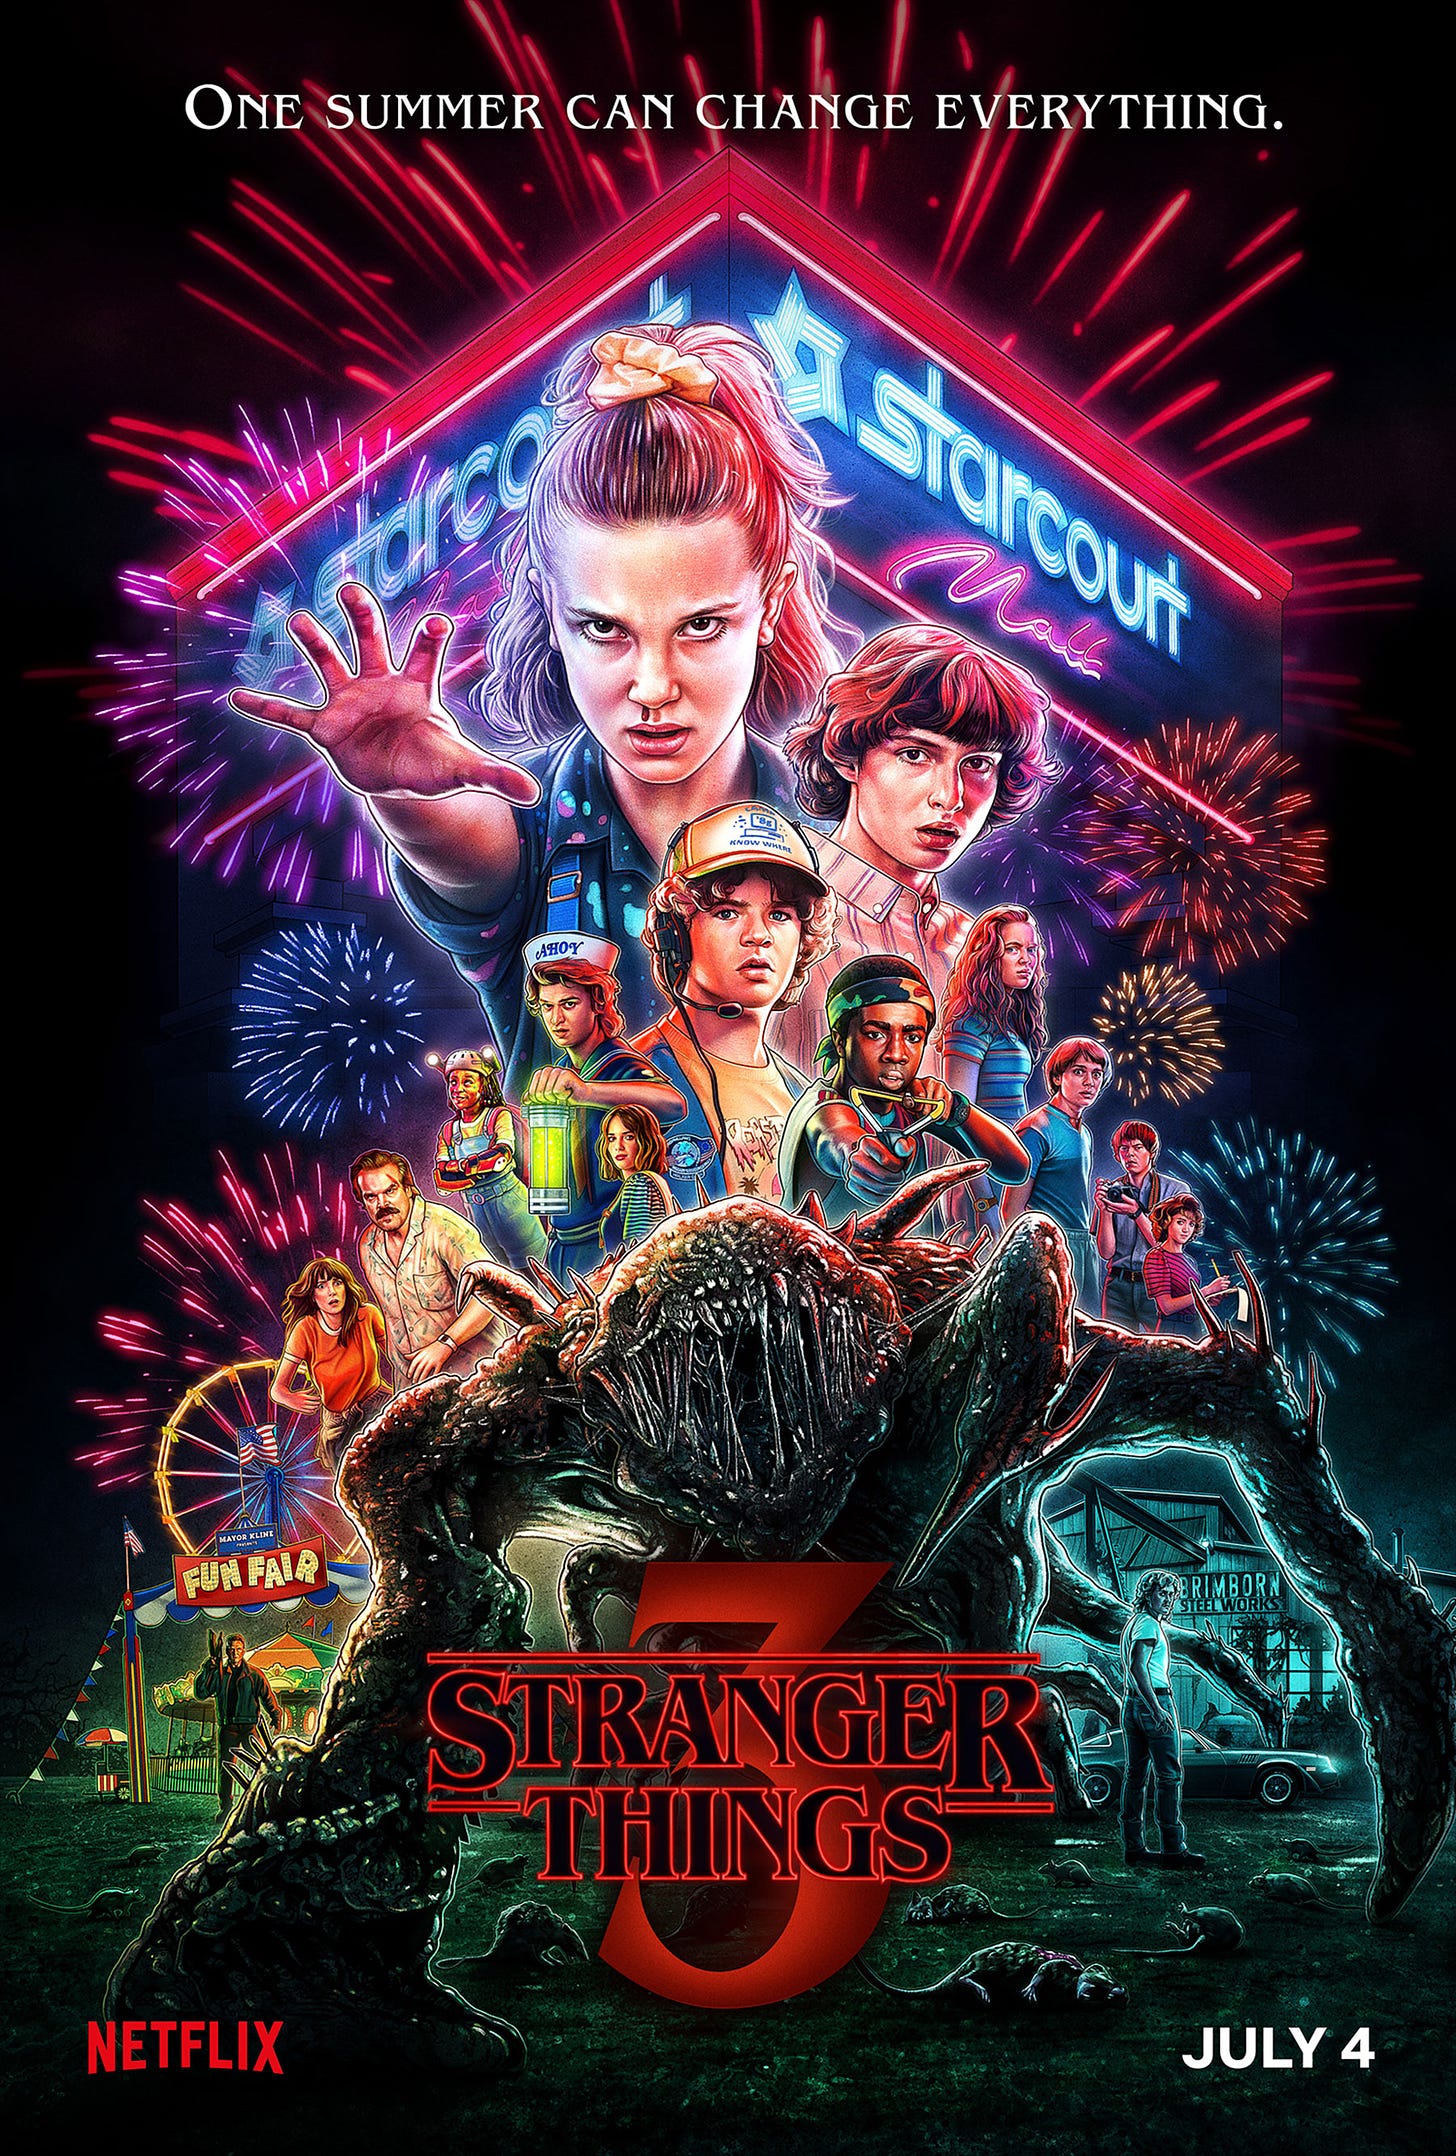 Netflix Review: ‘Stranger Things’ beautifully weaves storylines ...